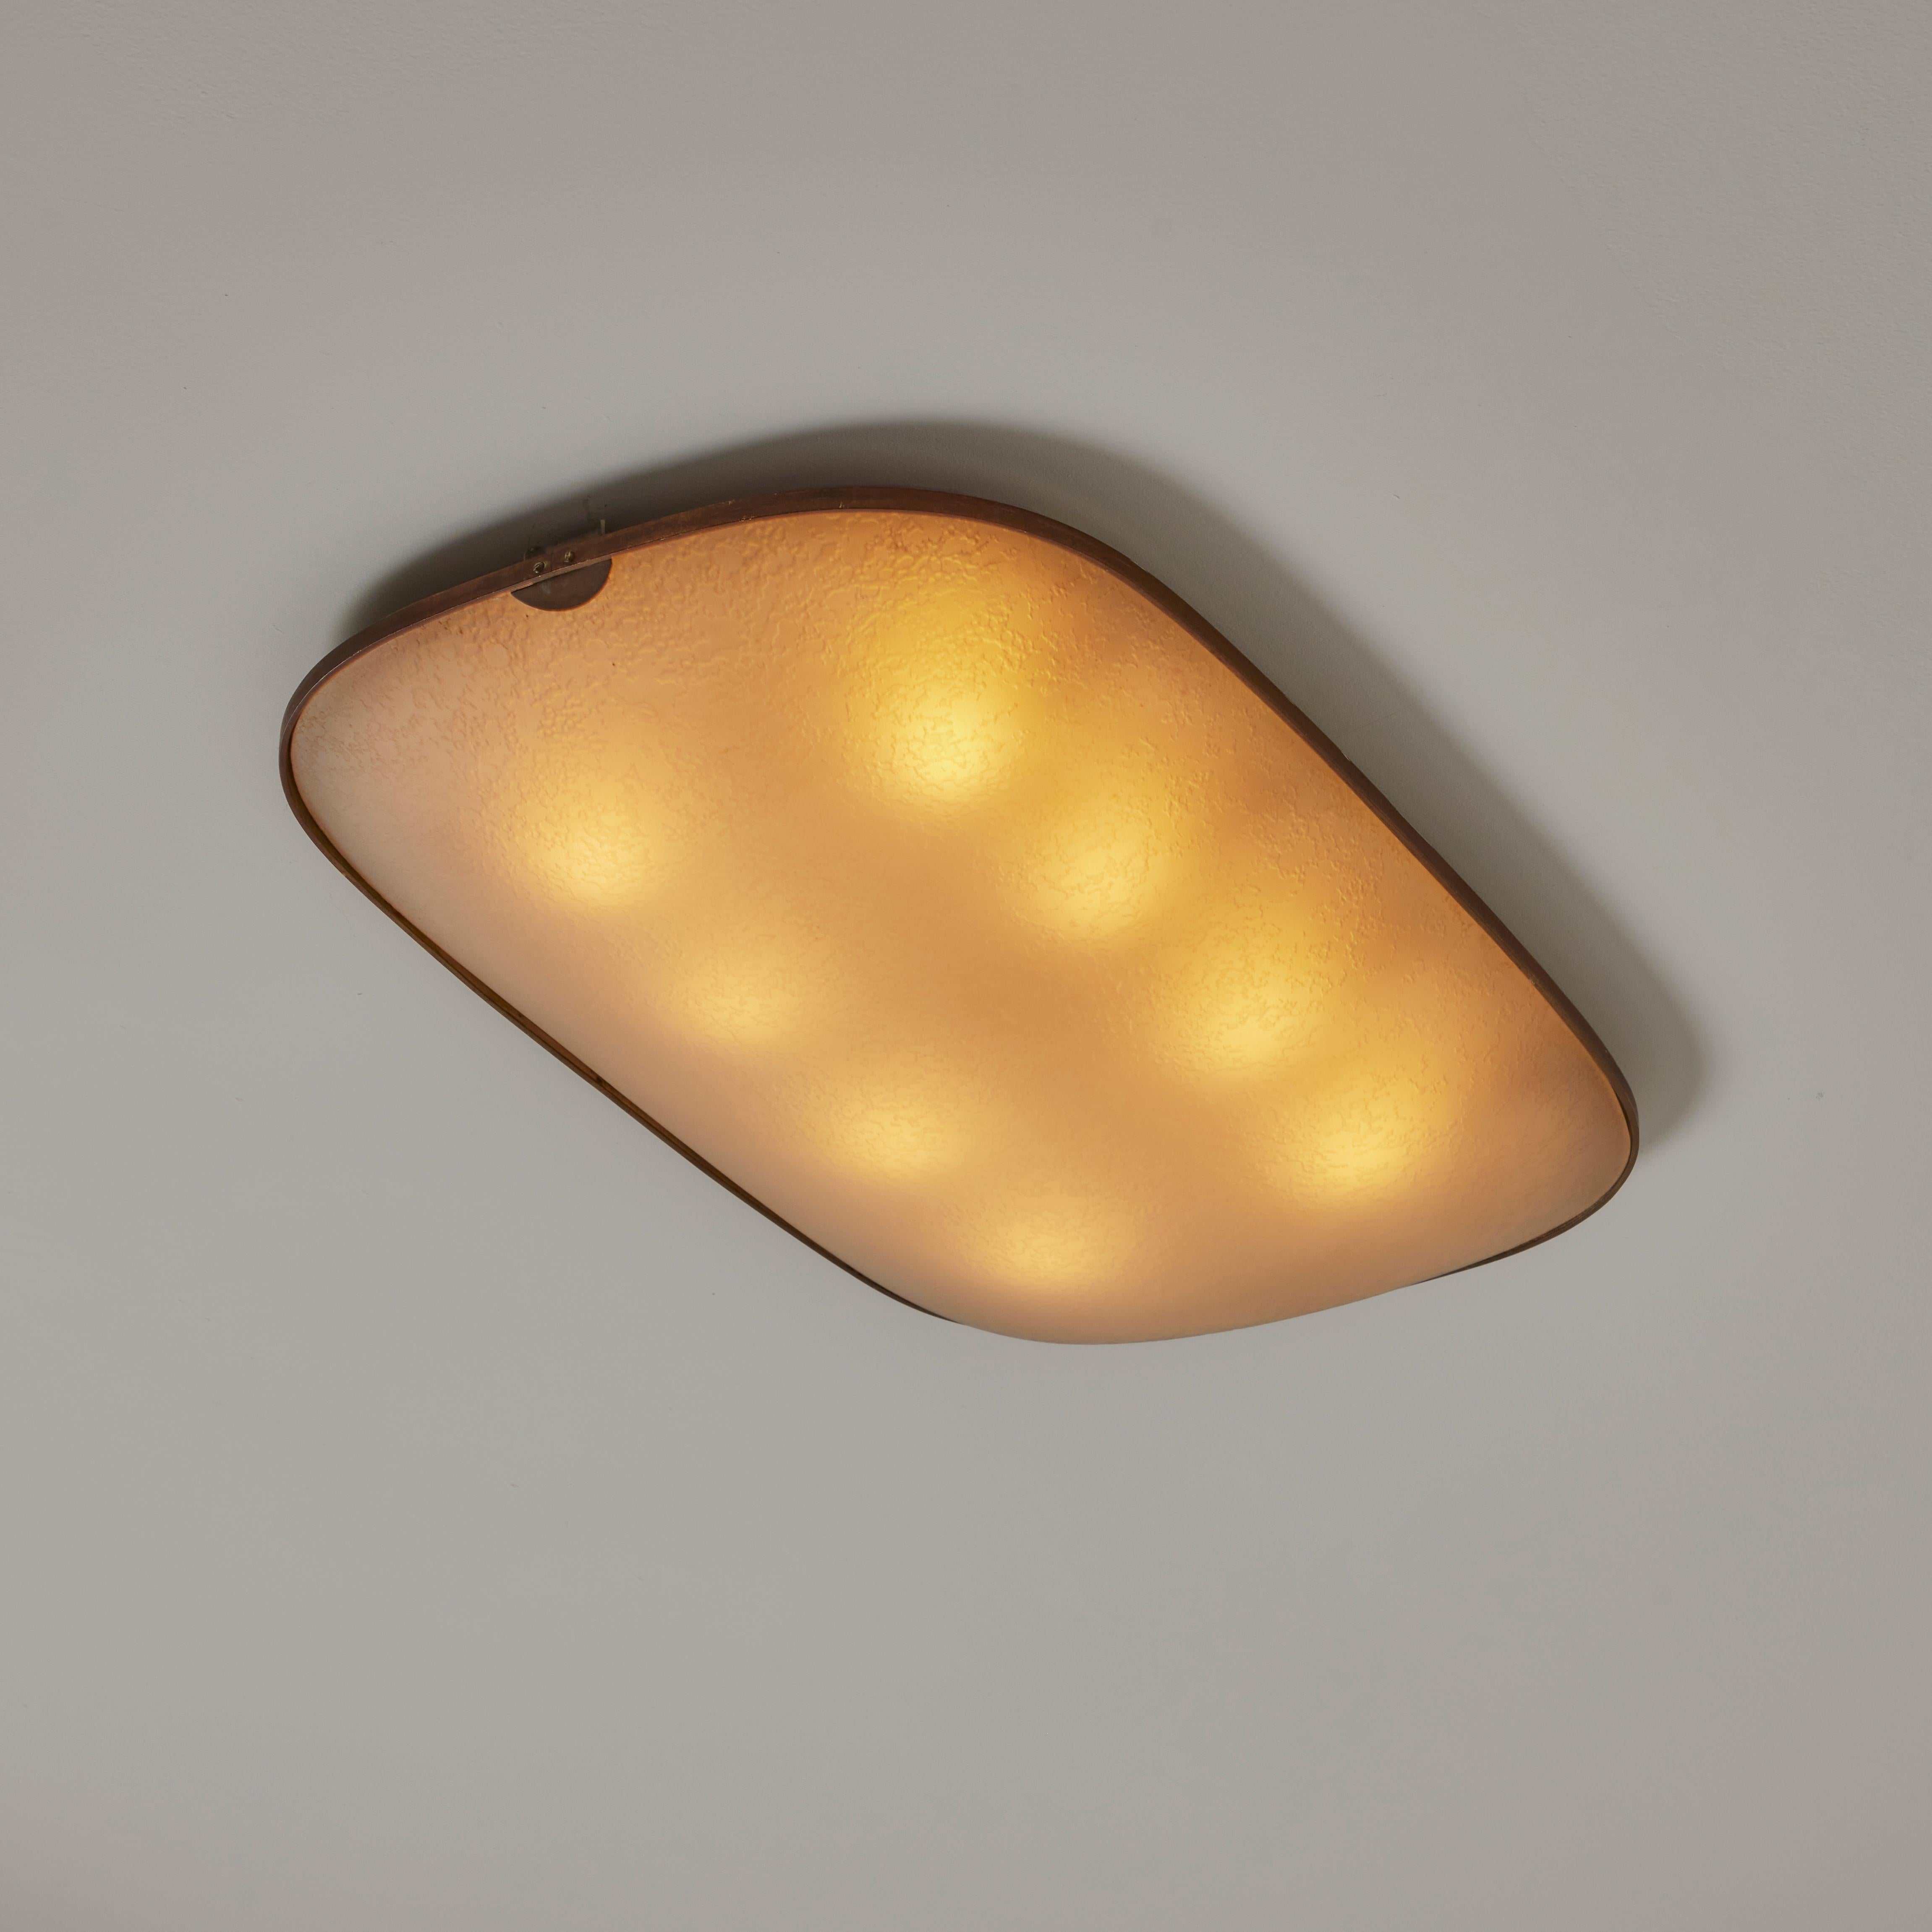 Large flush mount wall/ceiling light by Max Ingrand by Fontana Arte. Designed and manufactured in Italy, circa 1950's. Wired for U.S. standards. Glass, brass. Painted metal. We recommend Lamping: 120v 8Qty E14 Sockets 25w frosted bulbs, lightbulbs